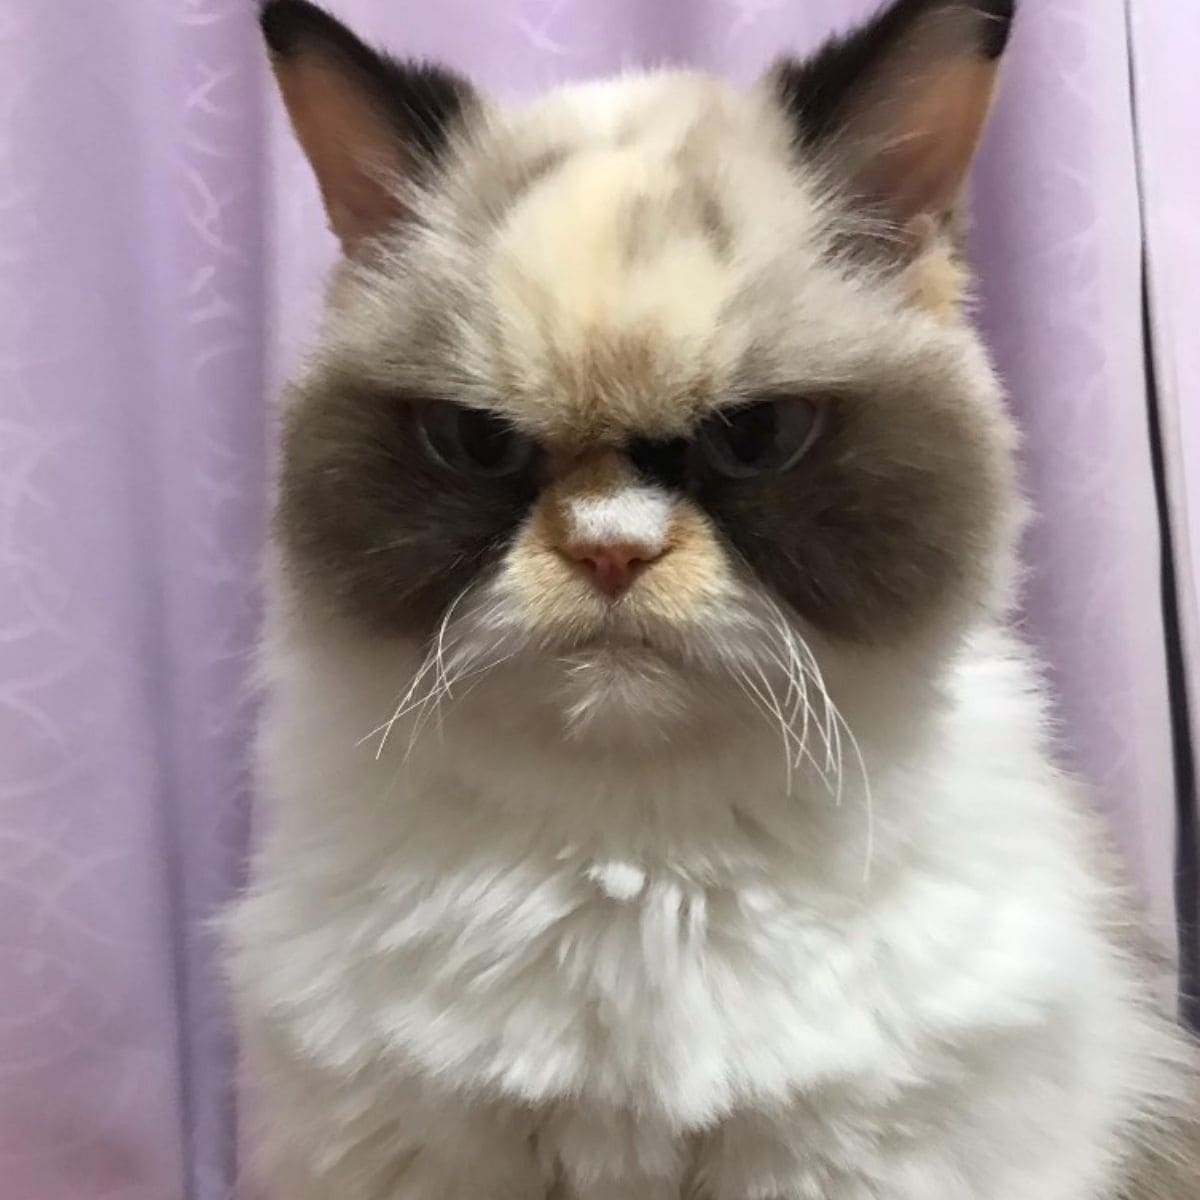 a grumpy cat sits and looks ahead